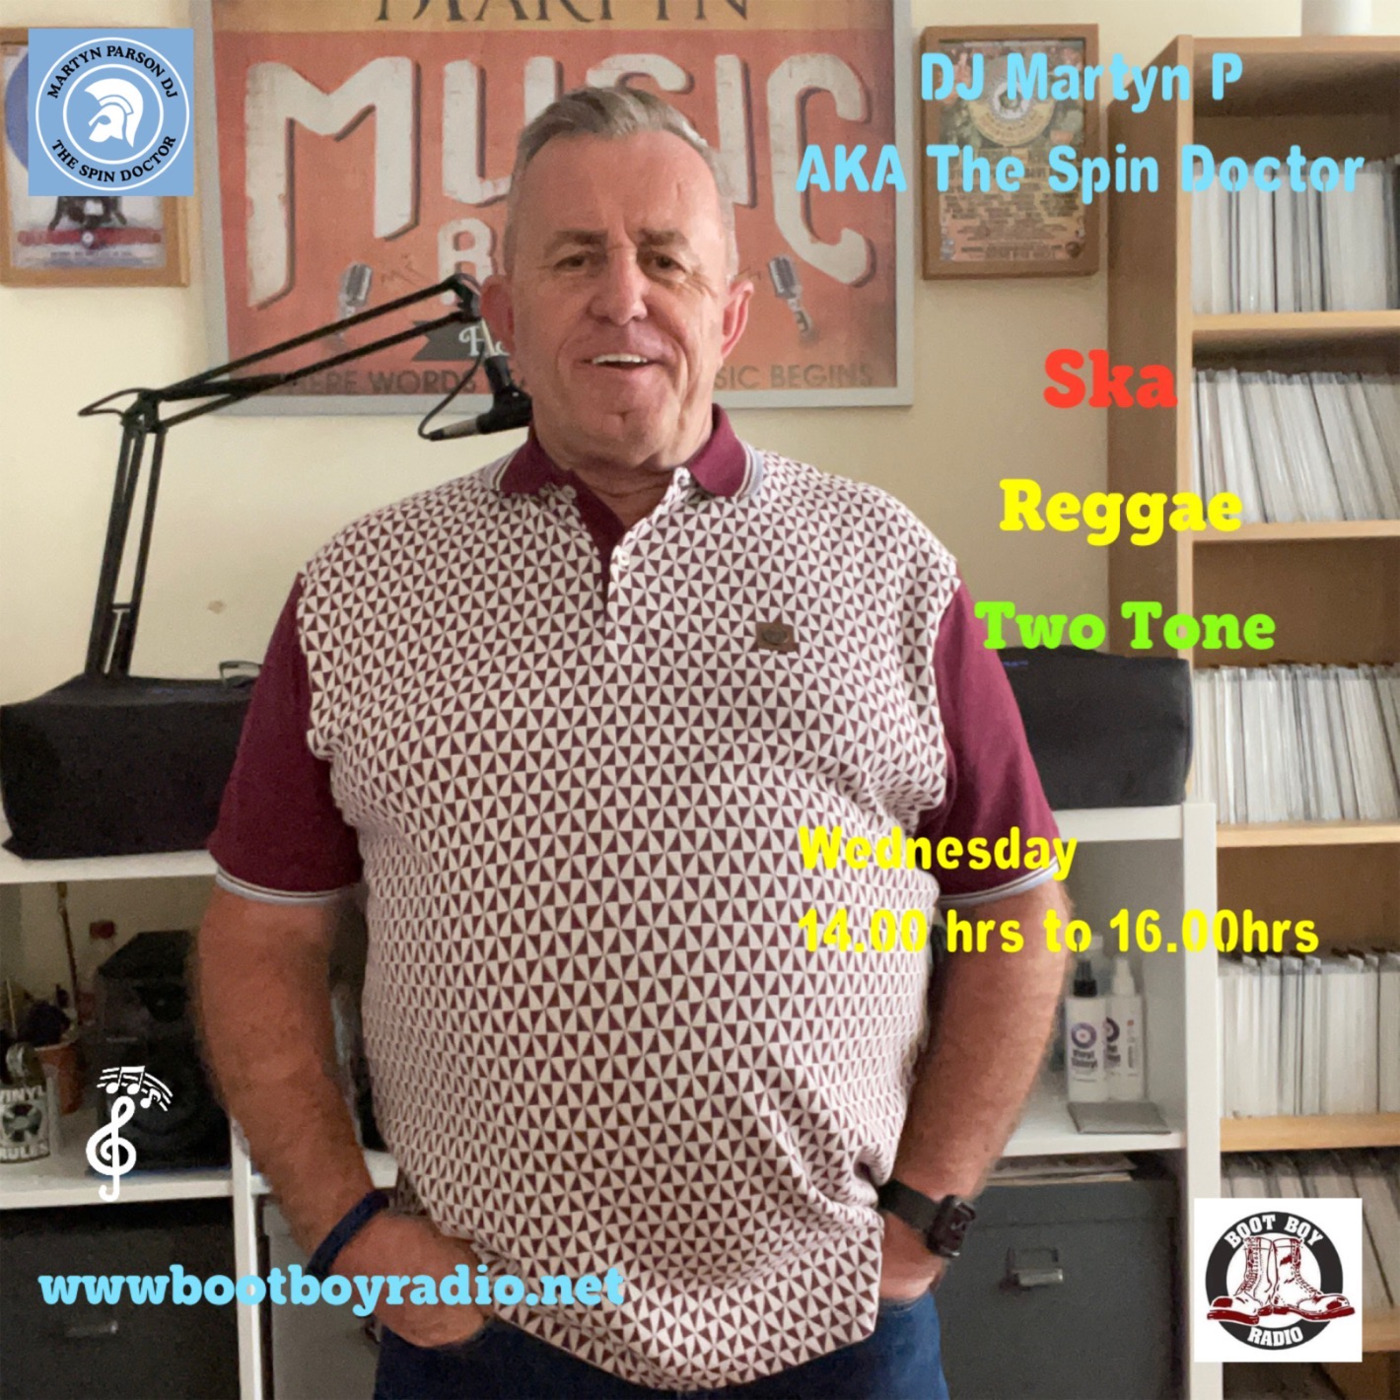 Episode 3579: Martyn Parson AkA The Spin Doctor 23rd May 2023 On www.bootboyradio.net